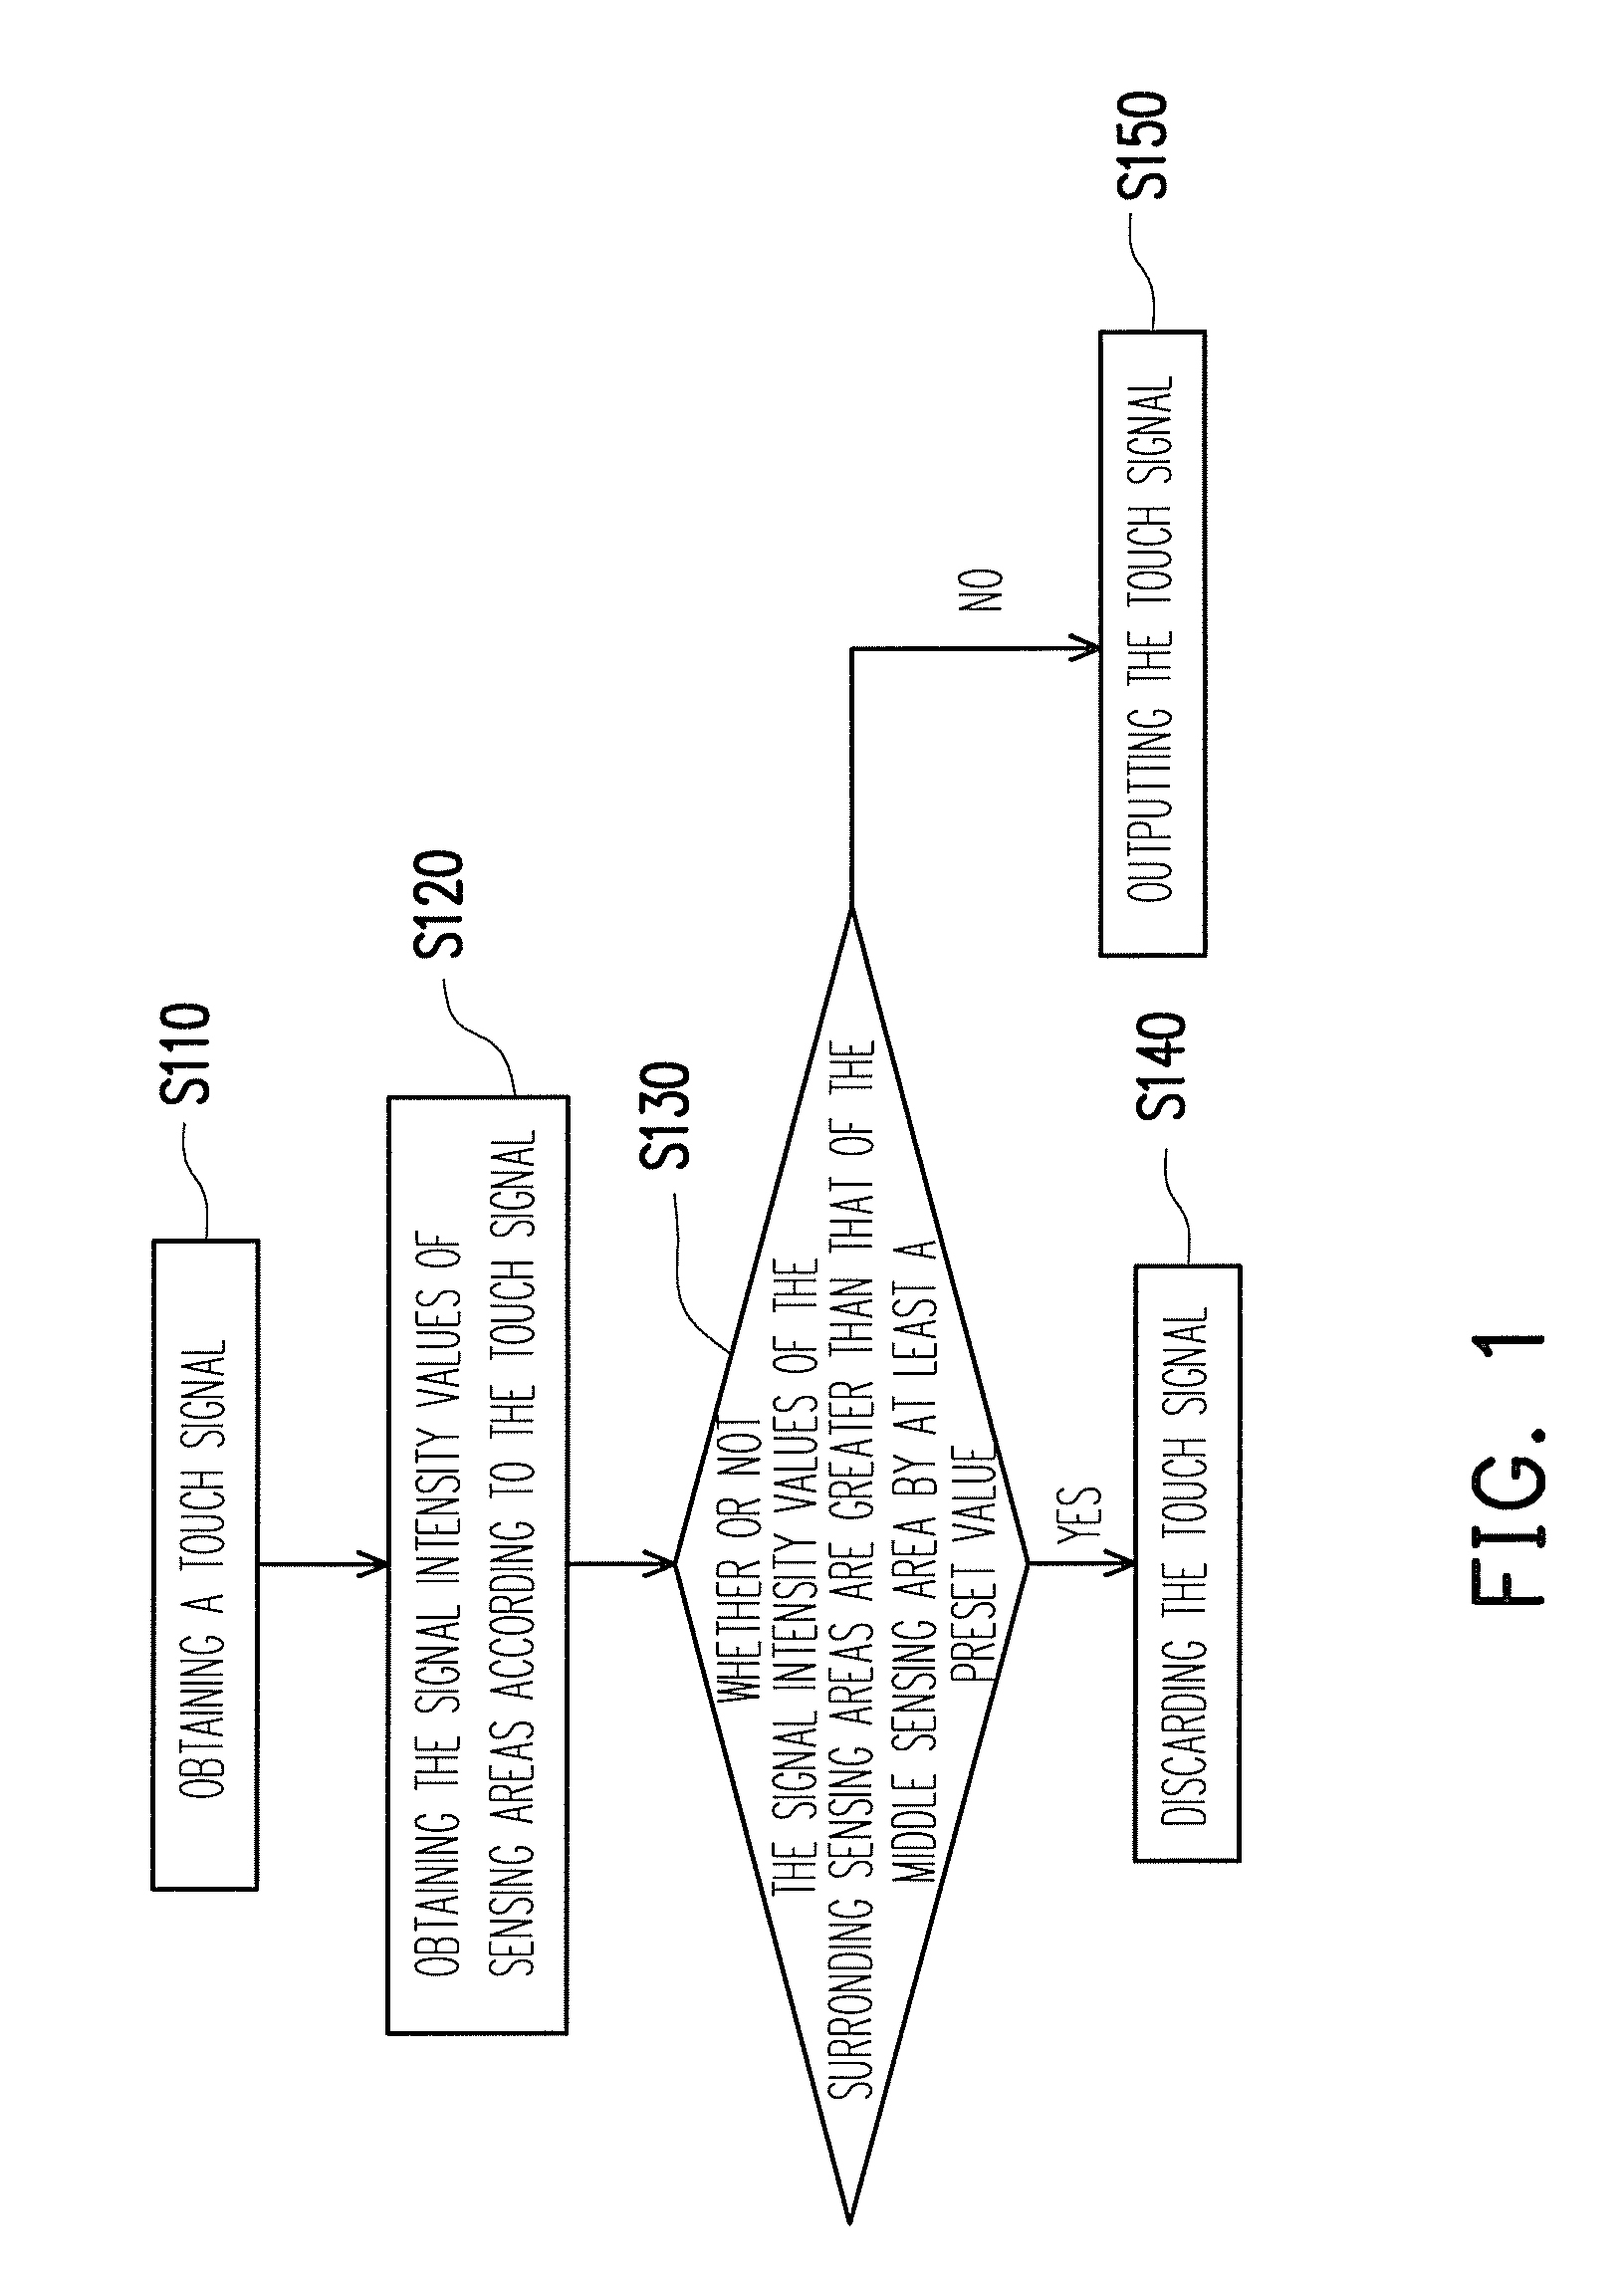 Method for filtering out signals of touch device